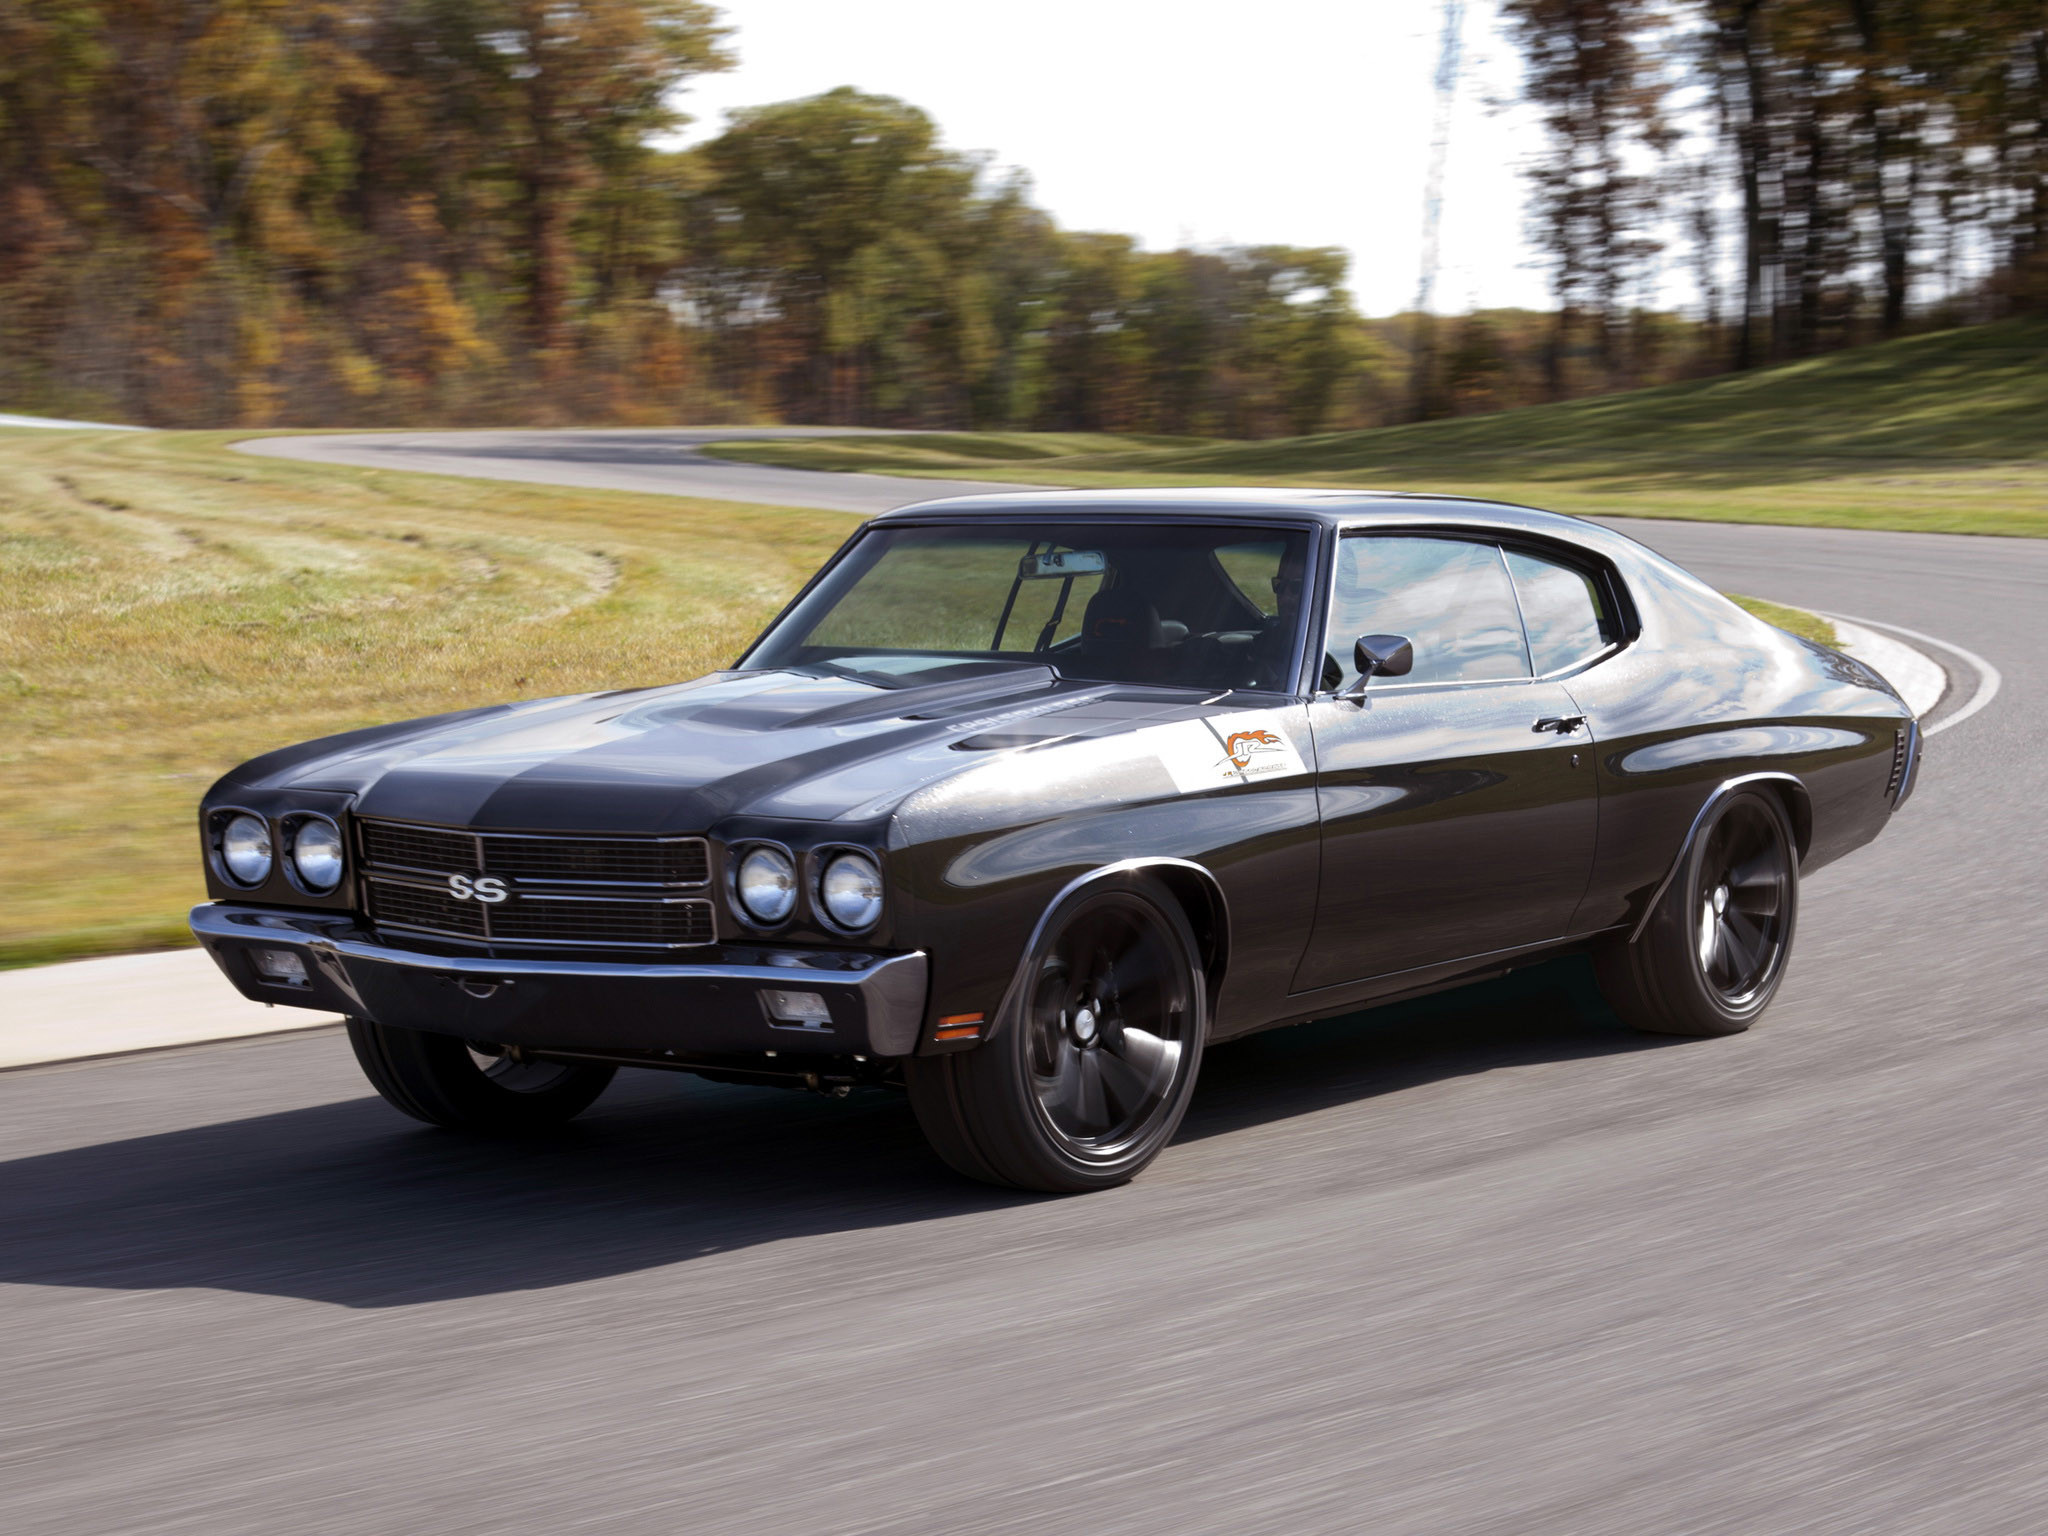 2048x1536 1969 Chevelle Ss Wallpaper Images amp Pictures Becuo 